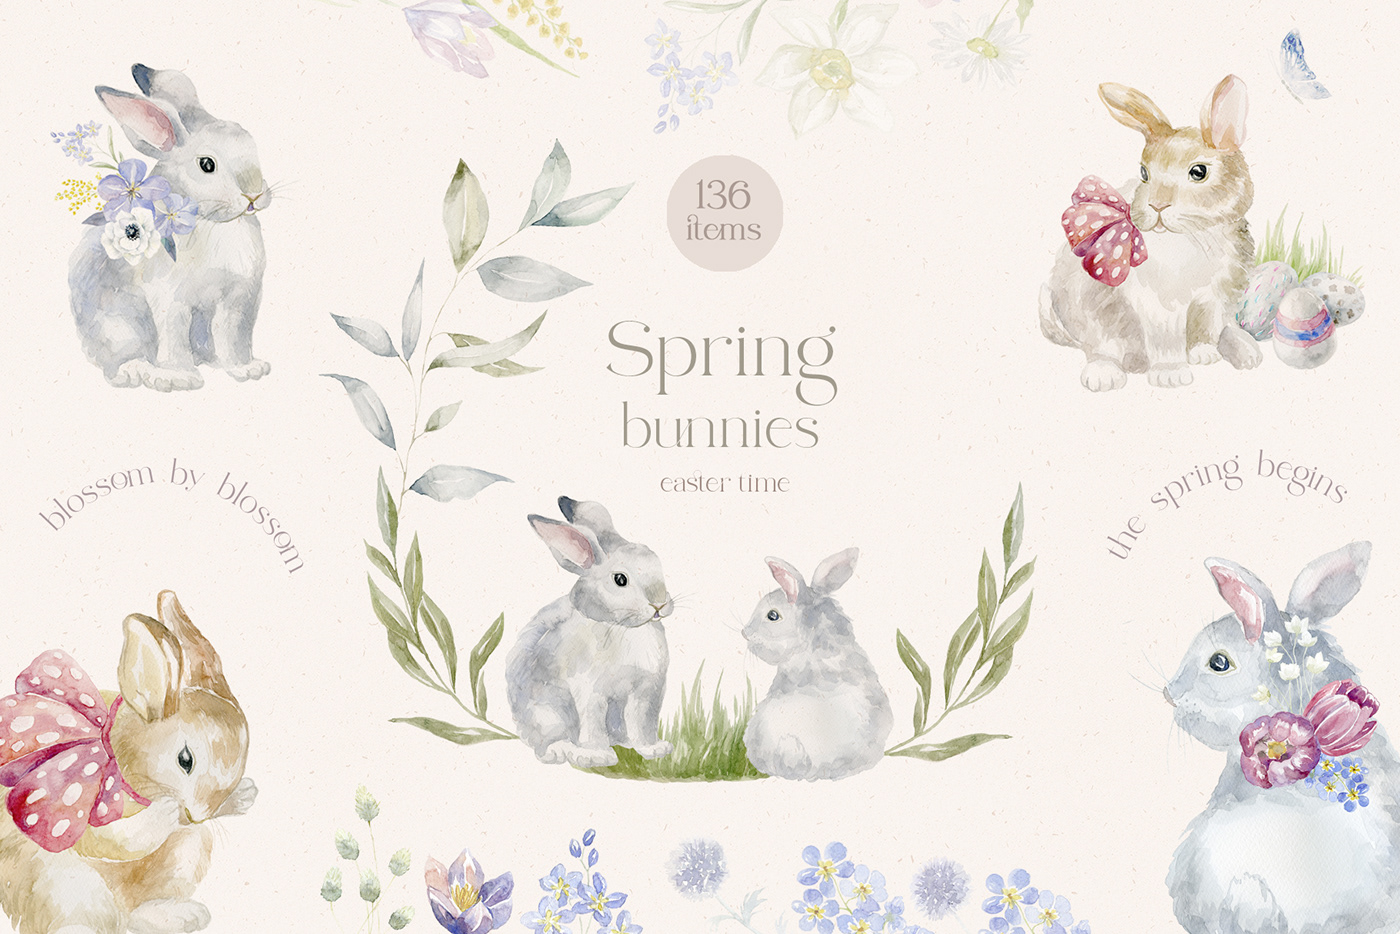 It's handpainting work with Bunnies, Floral and Easter Elements.
